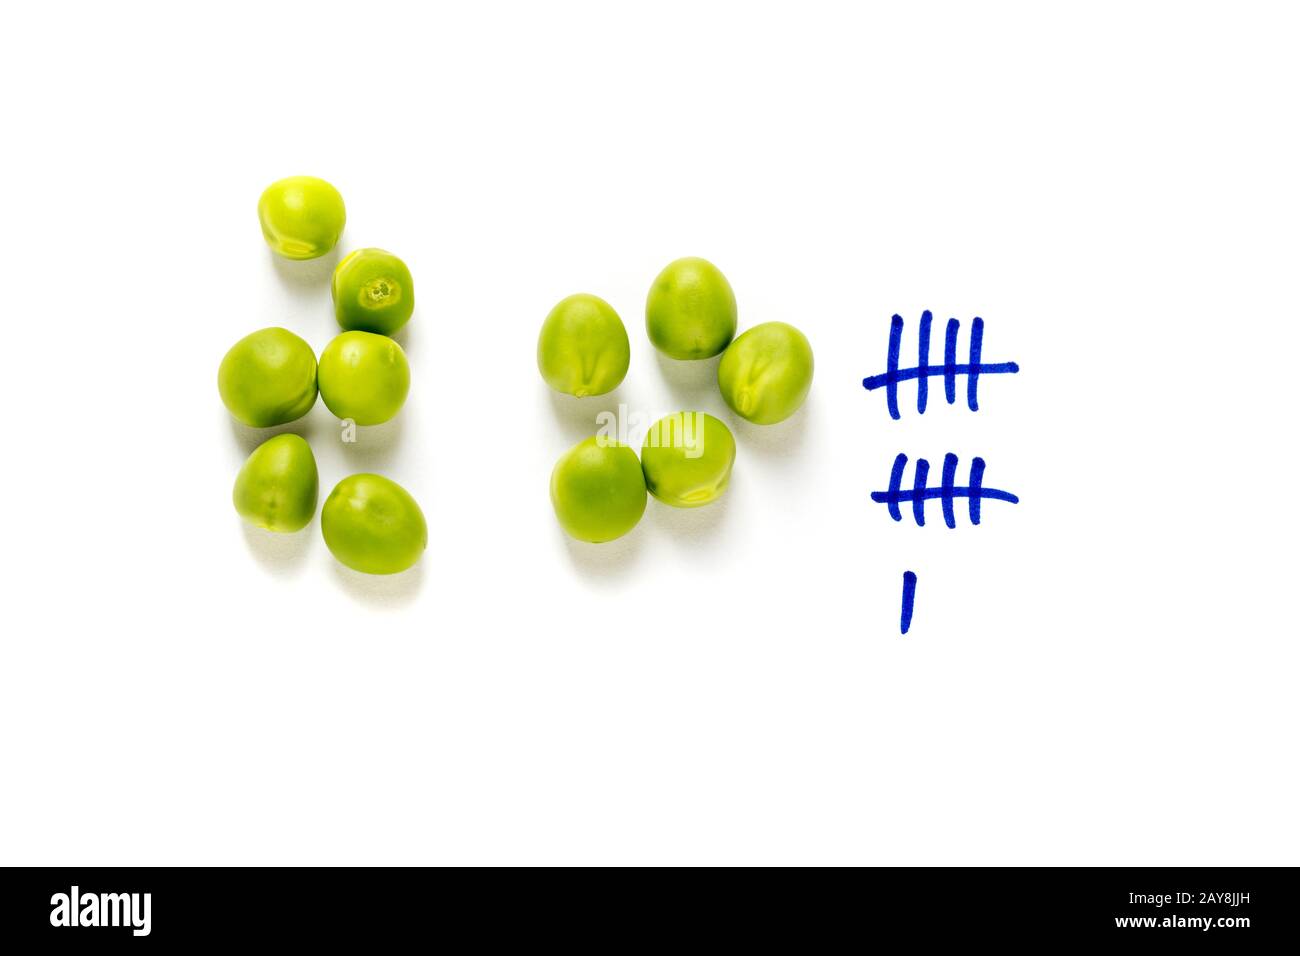 Counting peas on white background Stock Photo